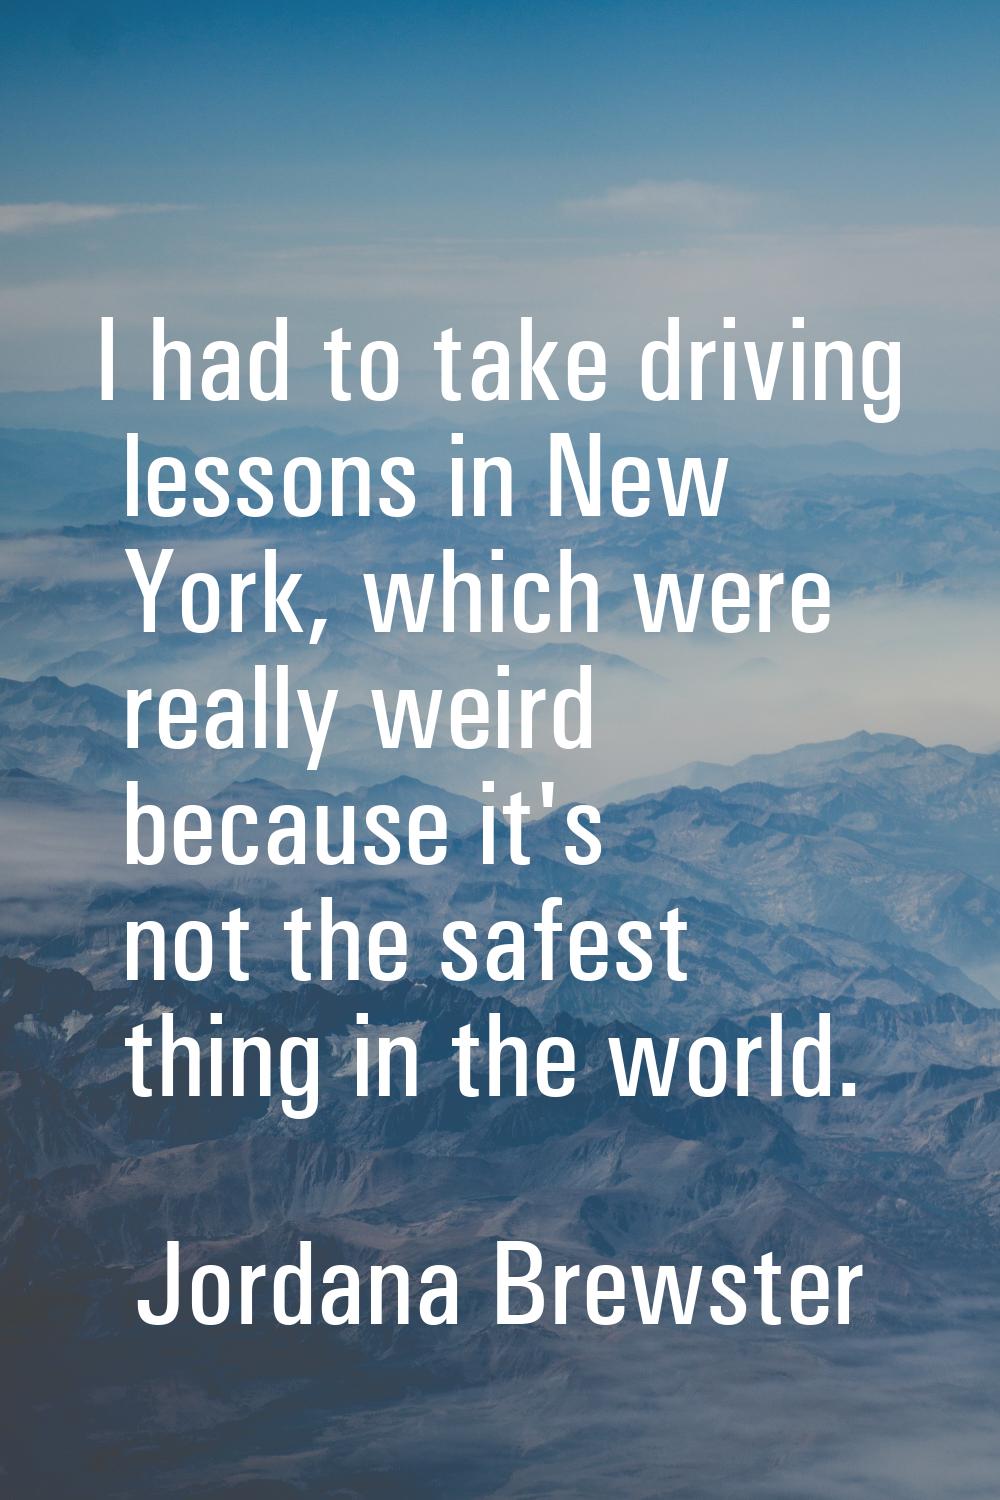 I had to take driving lessons in New York, which were really weird because it's not the safest thin